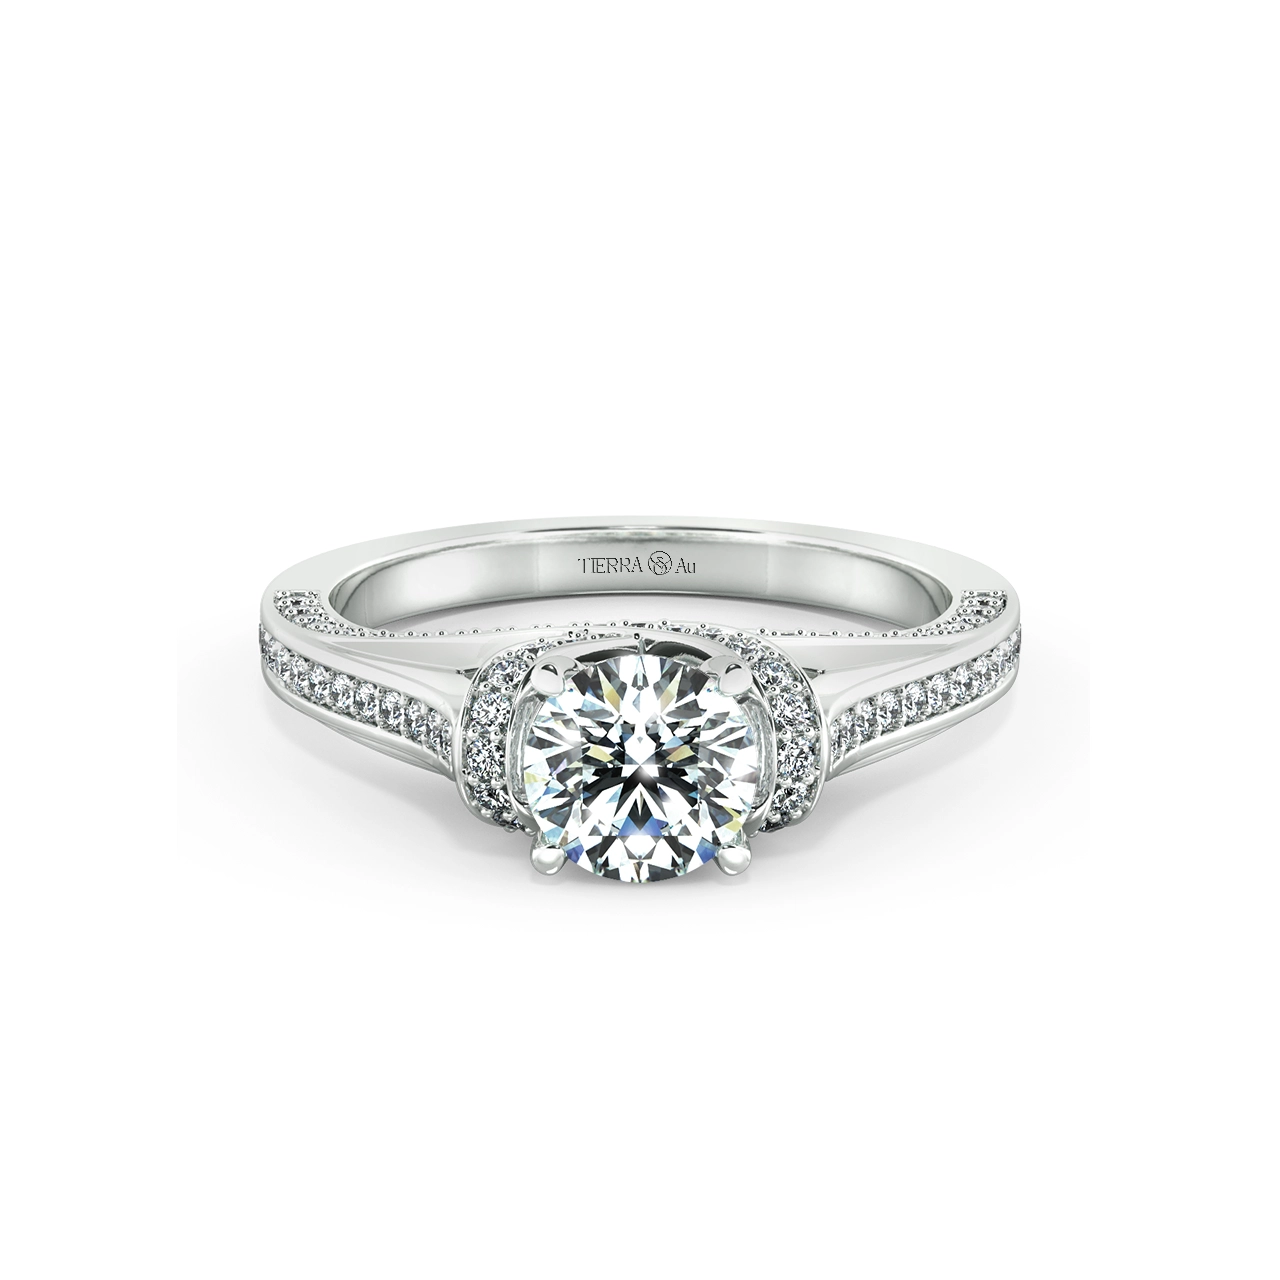 Trellis Engagement Ring with Stylized NCH1408 1